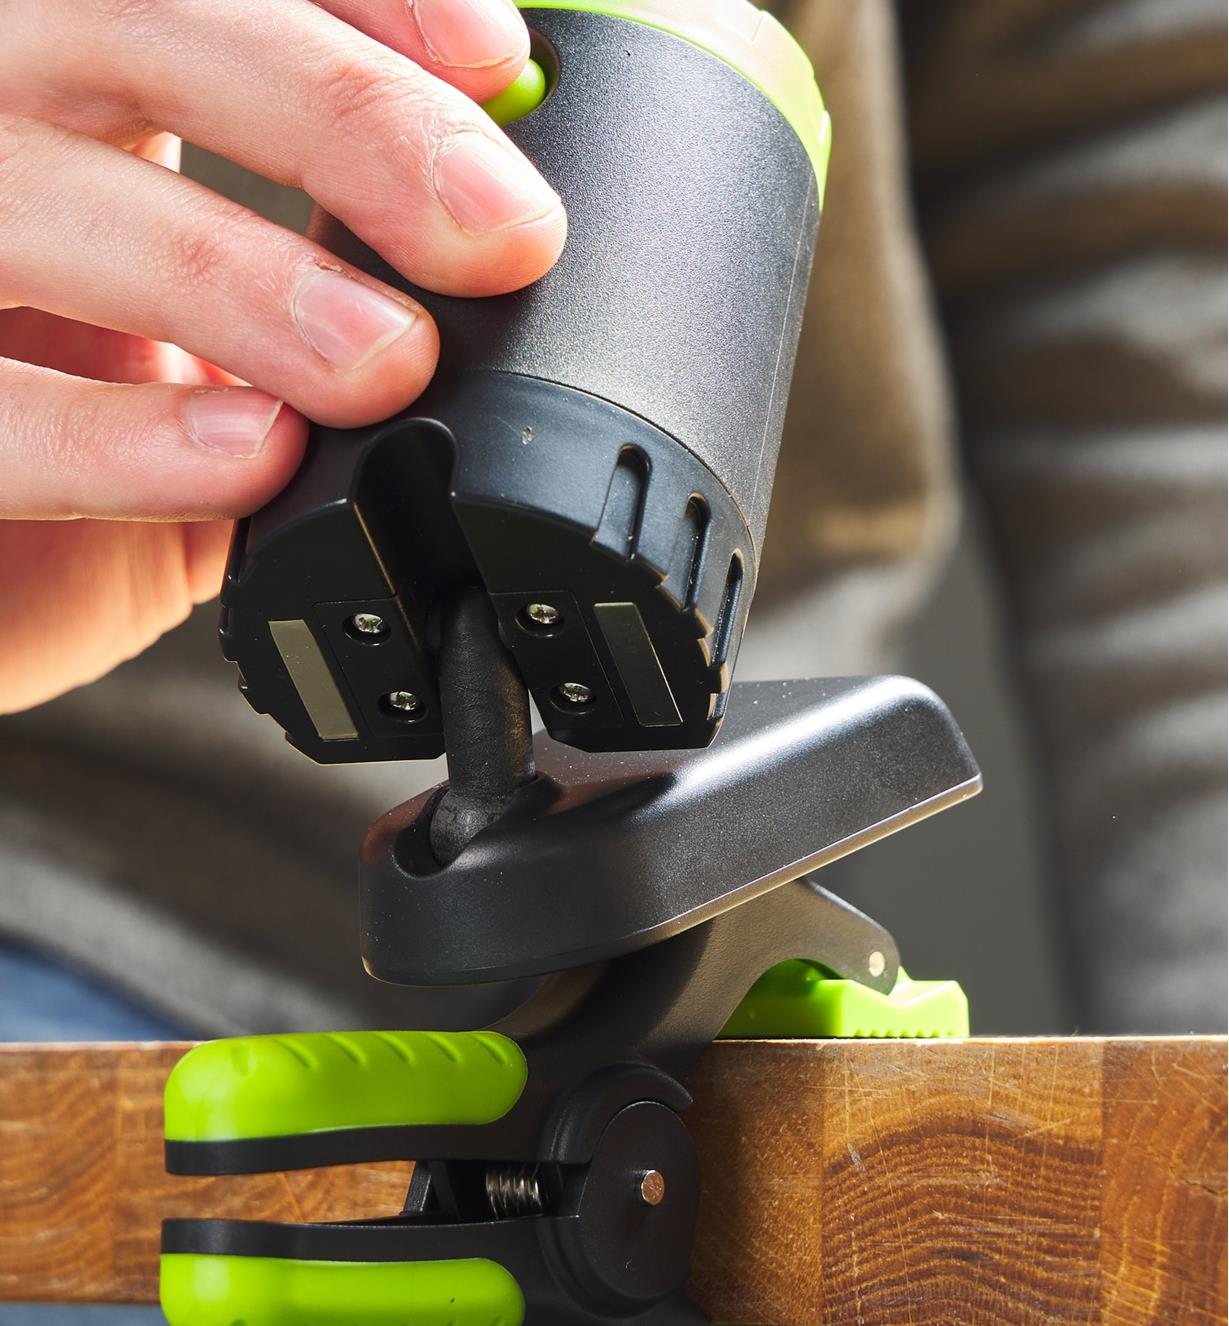 A close-up view of the double swivel mechanism in the rechargeable clip light’s mounting base